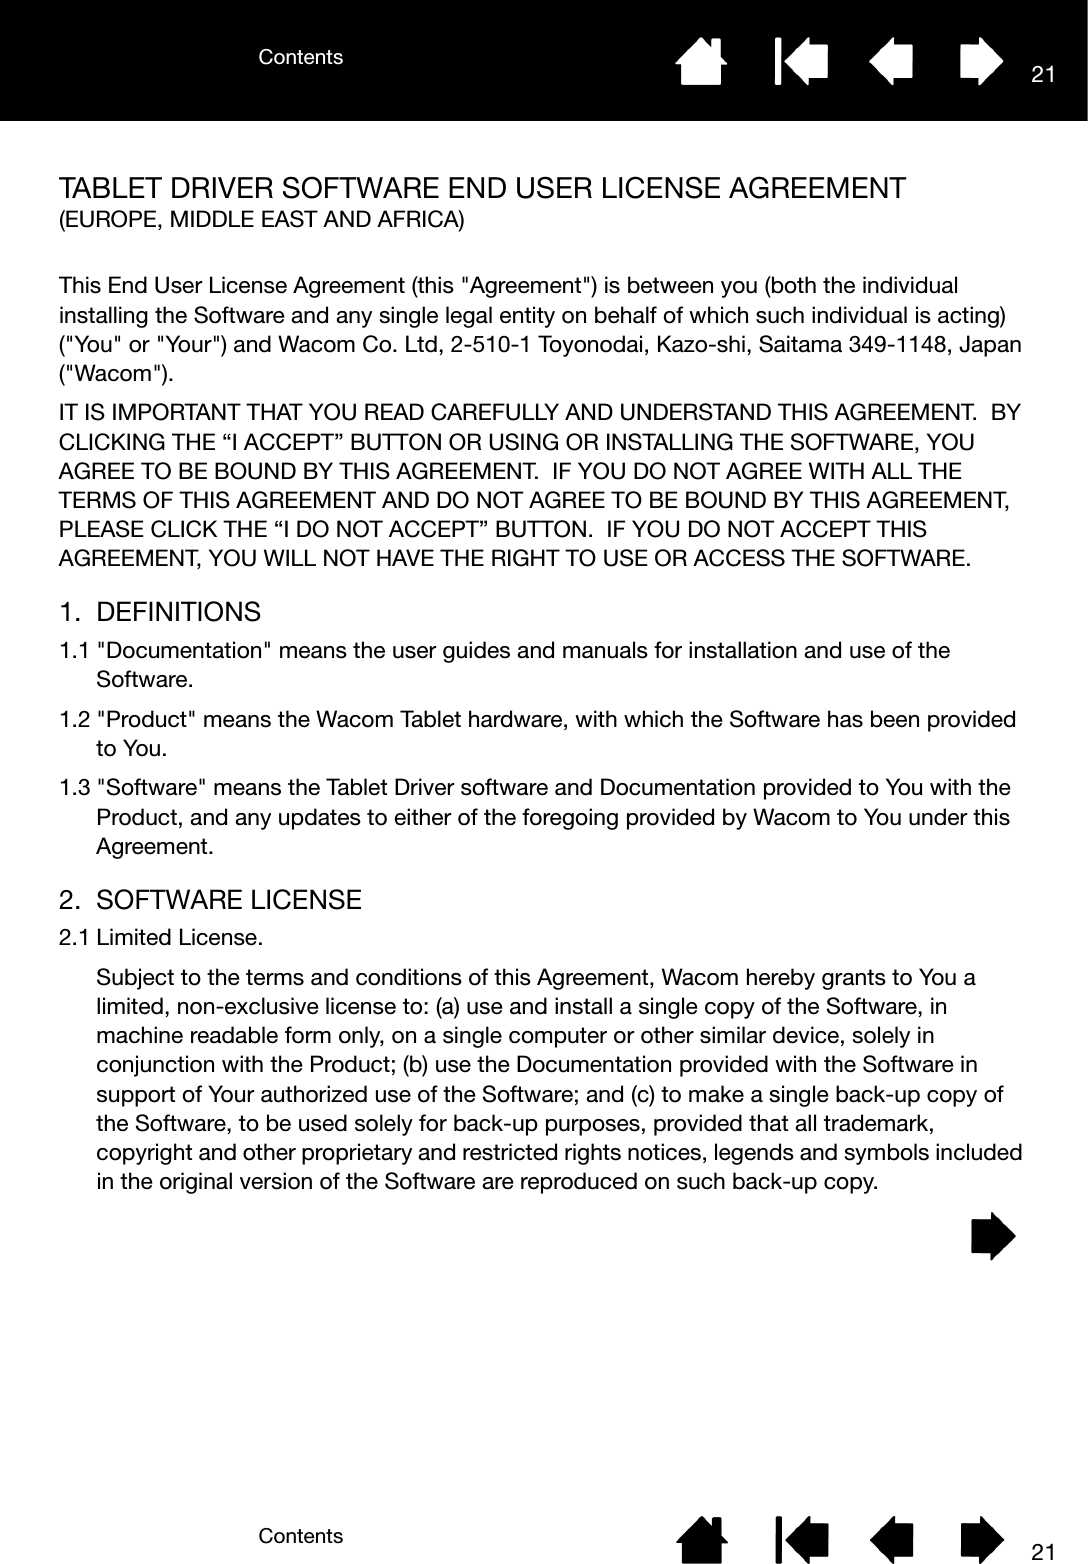 ContentsContents 2121TABLET DRIVER SOFTWARE END USER LICENSE AGREEMENT(EUROPE, MIDDLE EAST AND AFRICA)This End User License Agreement (this &quot;Agreement&quot;) is between you (both the individual installing the Software and any single legal entity on behalf of which such individual is acting) (&quot;You&quot; or &quot;Your&quot;) and Wacom Co. Ltd, 2-510-1 Toyonodai, Kazo-shi, Saitama 349-1148, Japan (&quot;Wacom&quot;). IT IS IMPORTANT THAT YOU READ CAREFULLY AND UNDERSTAND THIS AGREEMENT.  BY CLICKING THE “I ACCEPT” BUTTON OR USING OR INSTALLING THE SOFTWARE, YOU AGREE TO BE BOUND BY THIS AGREEMENT.  IF YOU DO NOT AGREE WITH ALL THE TERMS OF THIS AGREEMENT AND DO NOT AGREE TO BE BOUND BY THIS AGREEMENT, PLEASE CLICK THE “I DO NOT ACCEPT” BUTTON.  IF YOU DO NOT ACCEPT THIS AGREEMENT, YOU WILL NOT HAVE THE RIGHT TO USE OR ACCESS THE SOFTWARE.1. DEFINITIONS1.1 &quot;Documentation&quot; means the user guides and manuals for installation and use of the Software. 1.2 &quot;Product&quot; means the Wacom Tablet hardware, with which the Software has been provided to You. 1.3 &quot;Software&quot; means the Tablet Driver software and Documentation provided to You with the Product, and any updates to either of the foregoing provided by Wacom to You under this Agreement.2. SOFTWARE LICENSE2.1 Limited License.Subject to the terms and conditions of this Agreement, Wacom hereby grants to You a limited, non-exclusive license to: (a) use and install a single copy of the Software, in machine readable form only, on a single computer or other similar device, solely in conjunction with the Product; (b) use the Documentation provided with the Software in support of Your authorized use of the Software; and (c) to make a single back-up copy of the Software, to be used solely for back-up purposes, provided that all trademark, copyright and other proprietary and restricted rights notices, legends and symbols included in the original version of the Software are reproduced on such back-up copy.